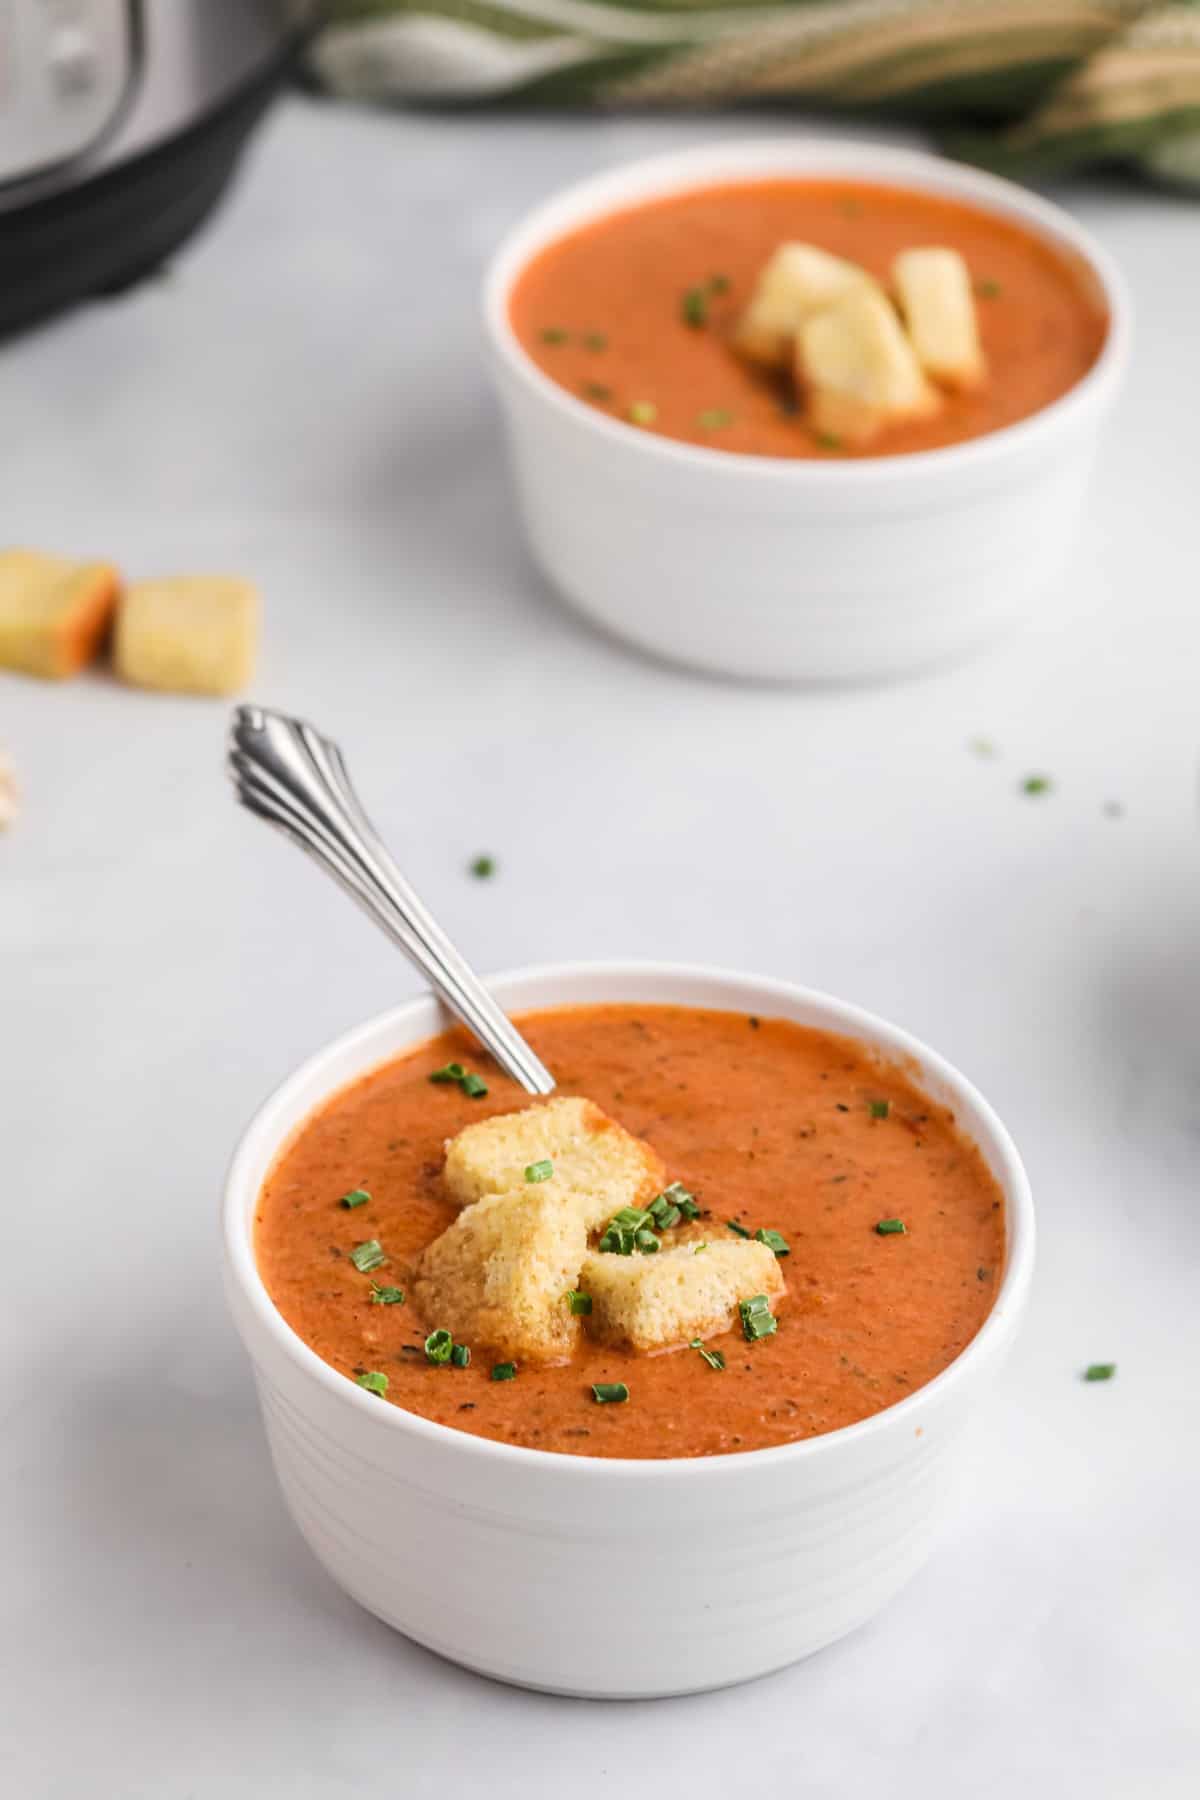 Two small white bowls of tomato soup with croutons.